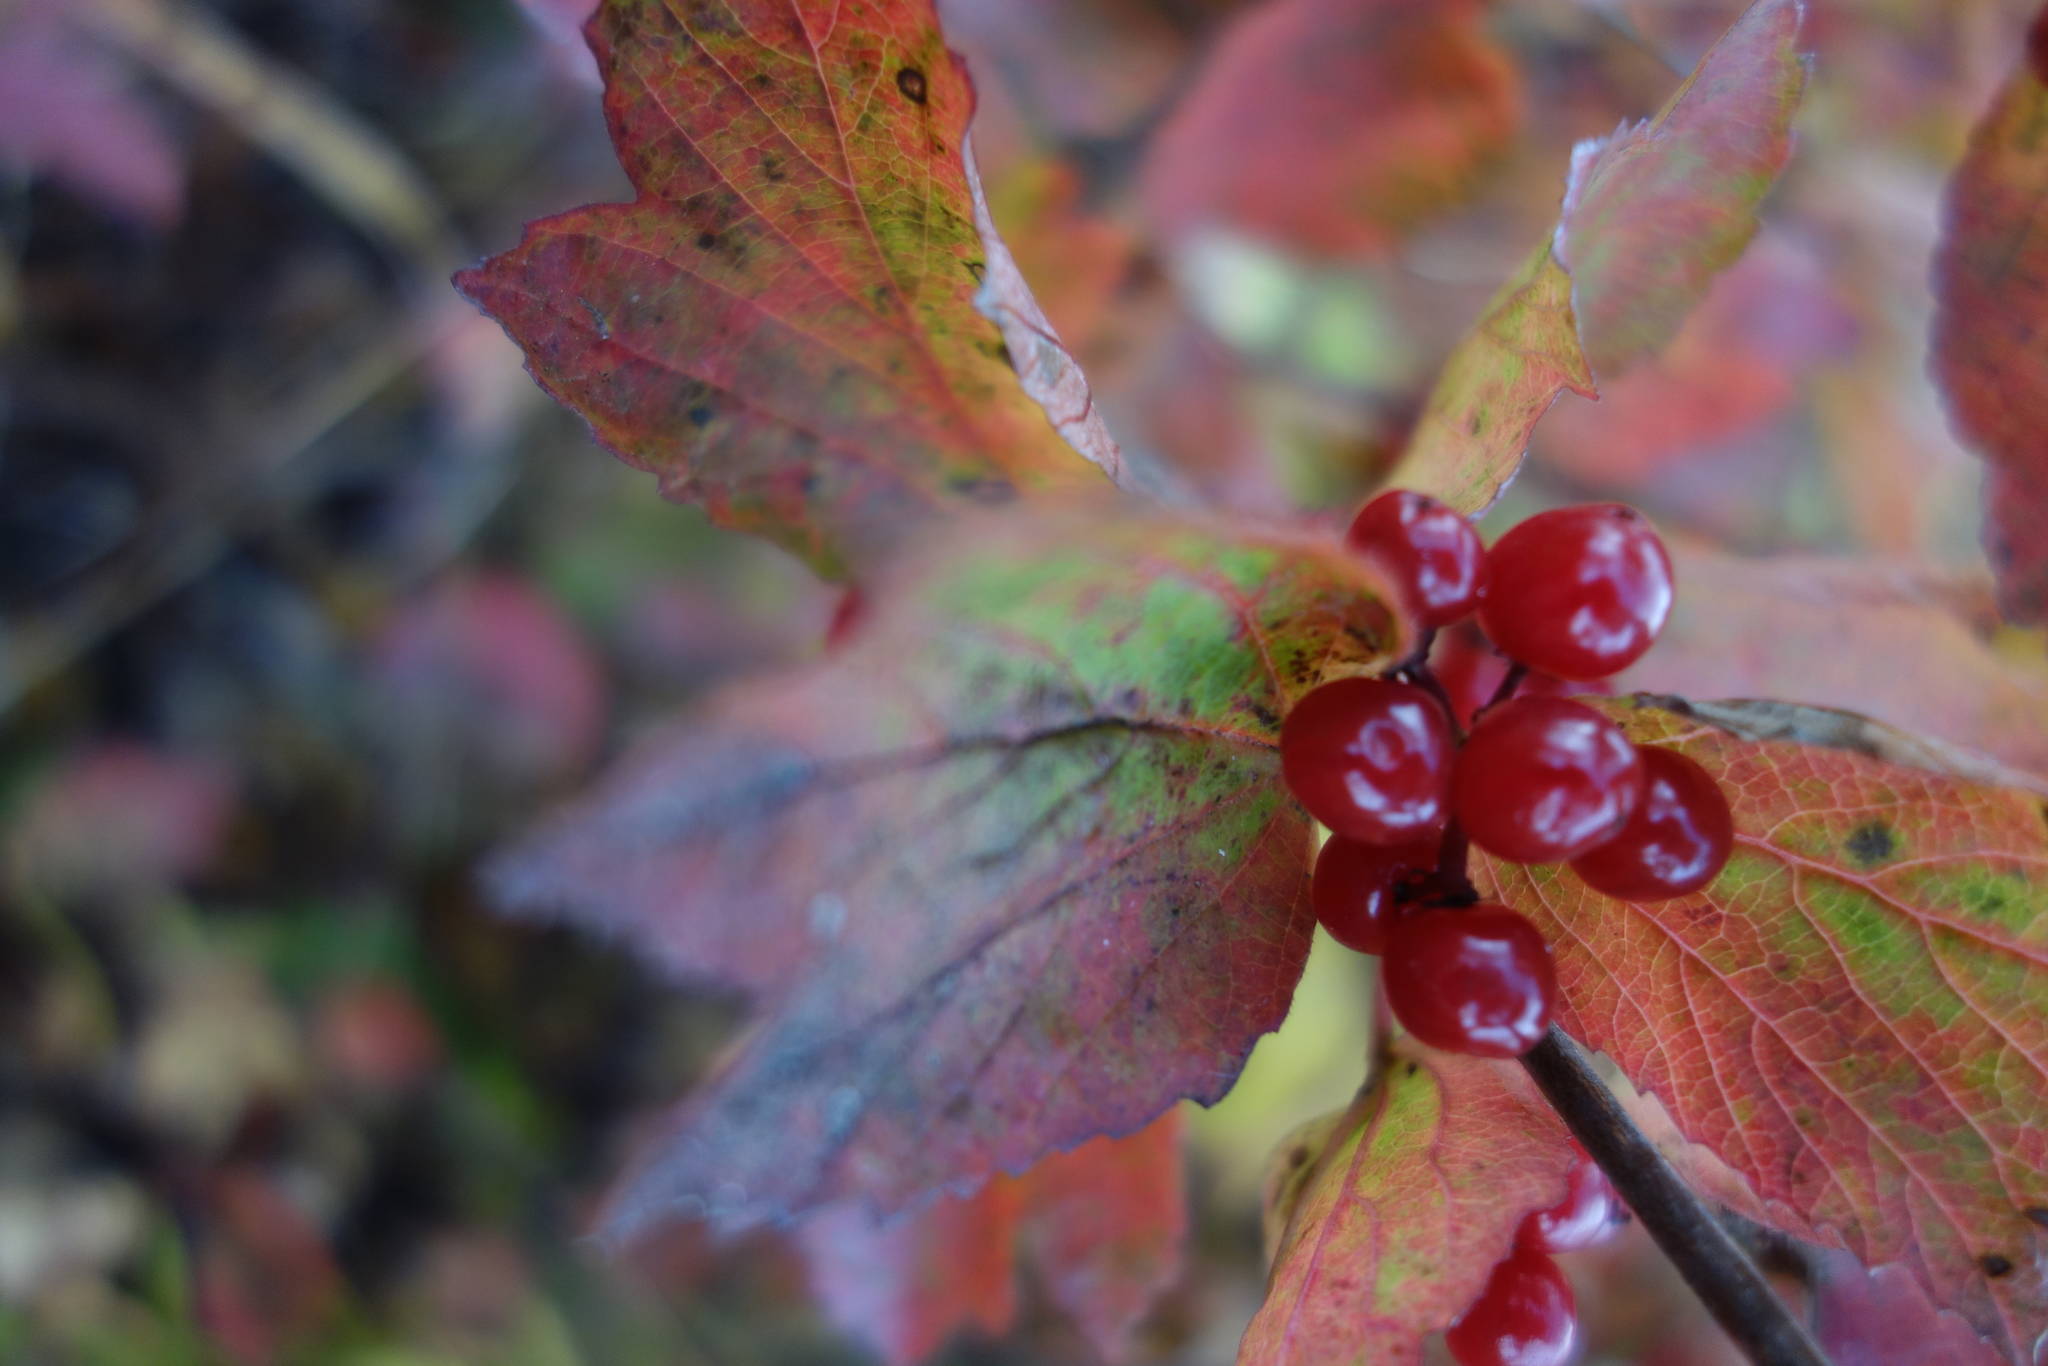 Highbush cranberry emits a musty smell in autumn. (Courtesy Photo / Ned Rozell)